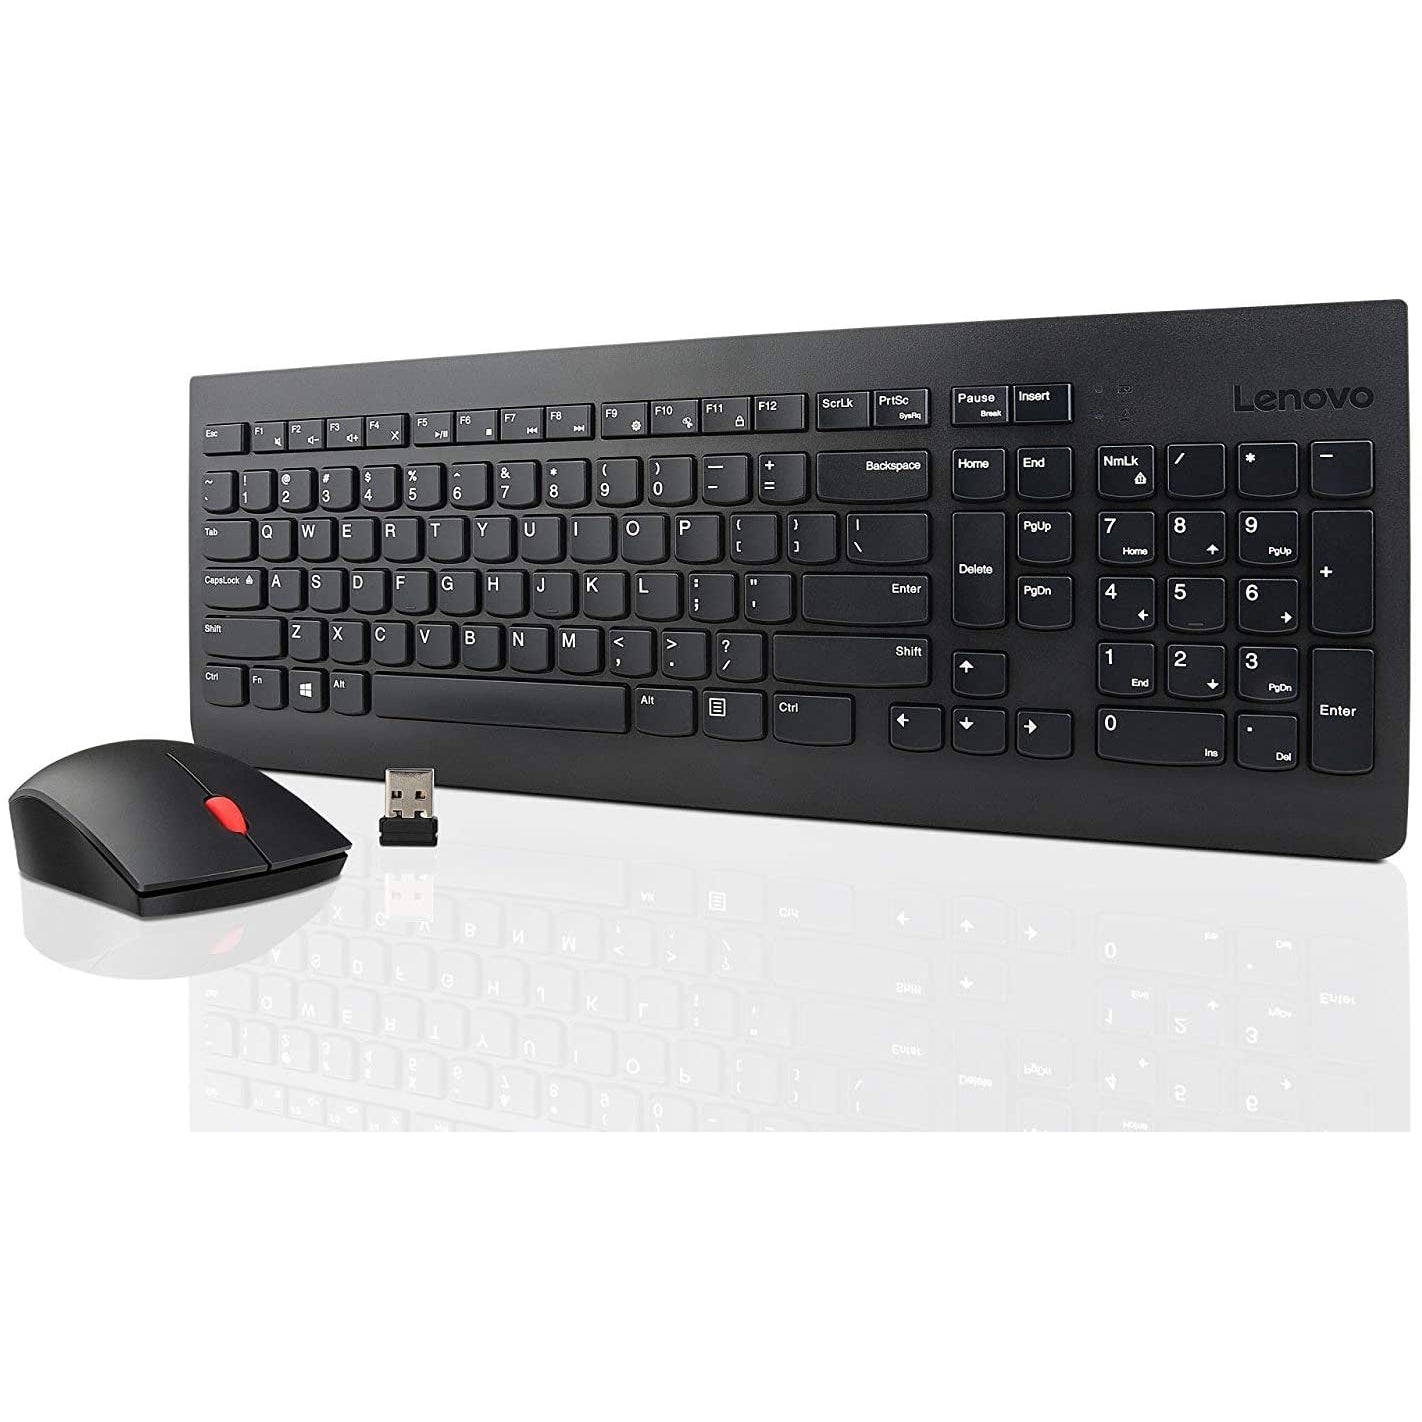 Lenovo 4X30M39496 Essential Wireless Keyboard and Mouse Combo - Black - Refurbished Excellent